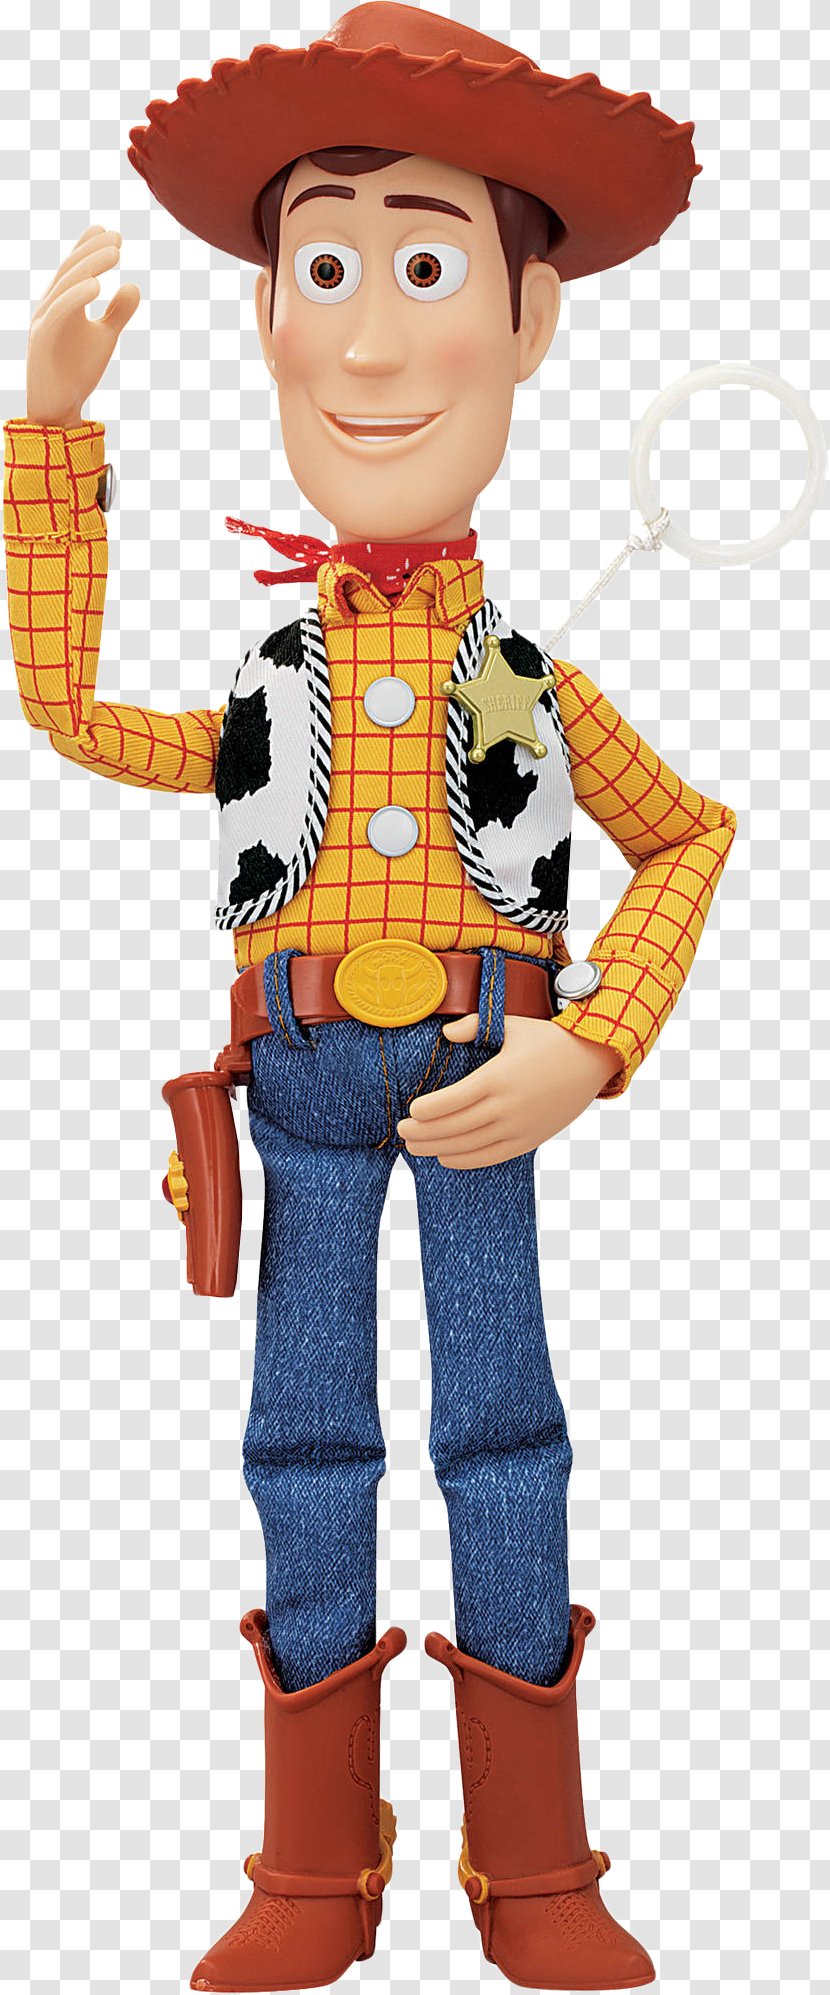 Sheriff Woody Toy Story Buzz Lightyear Jessie Action & Figures - 2 Transparent PNG